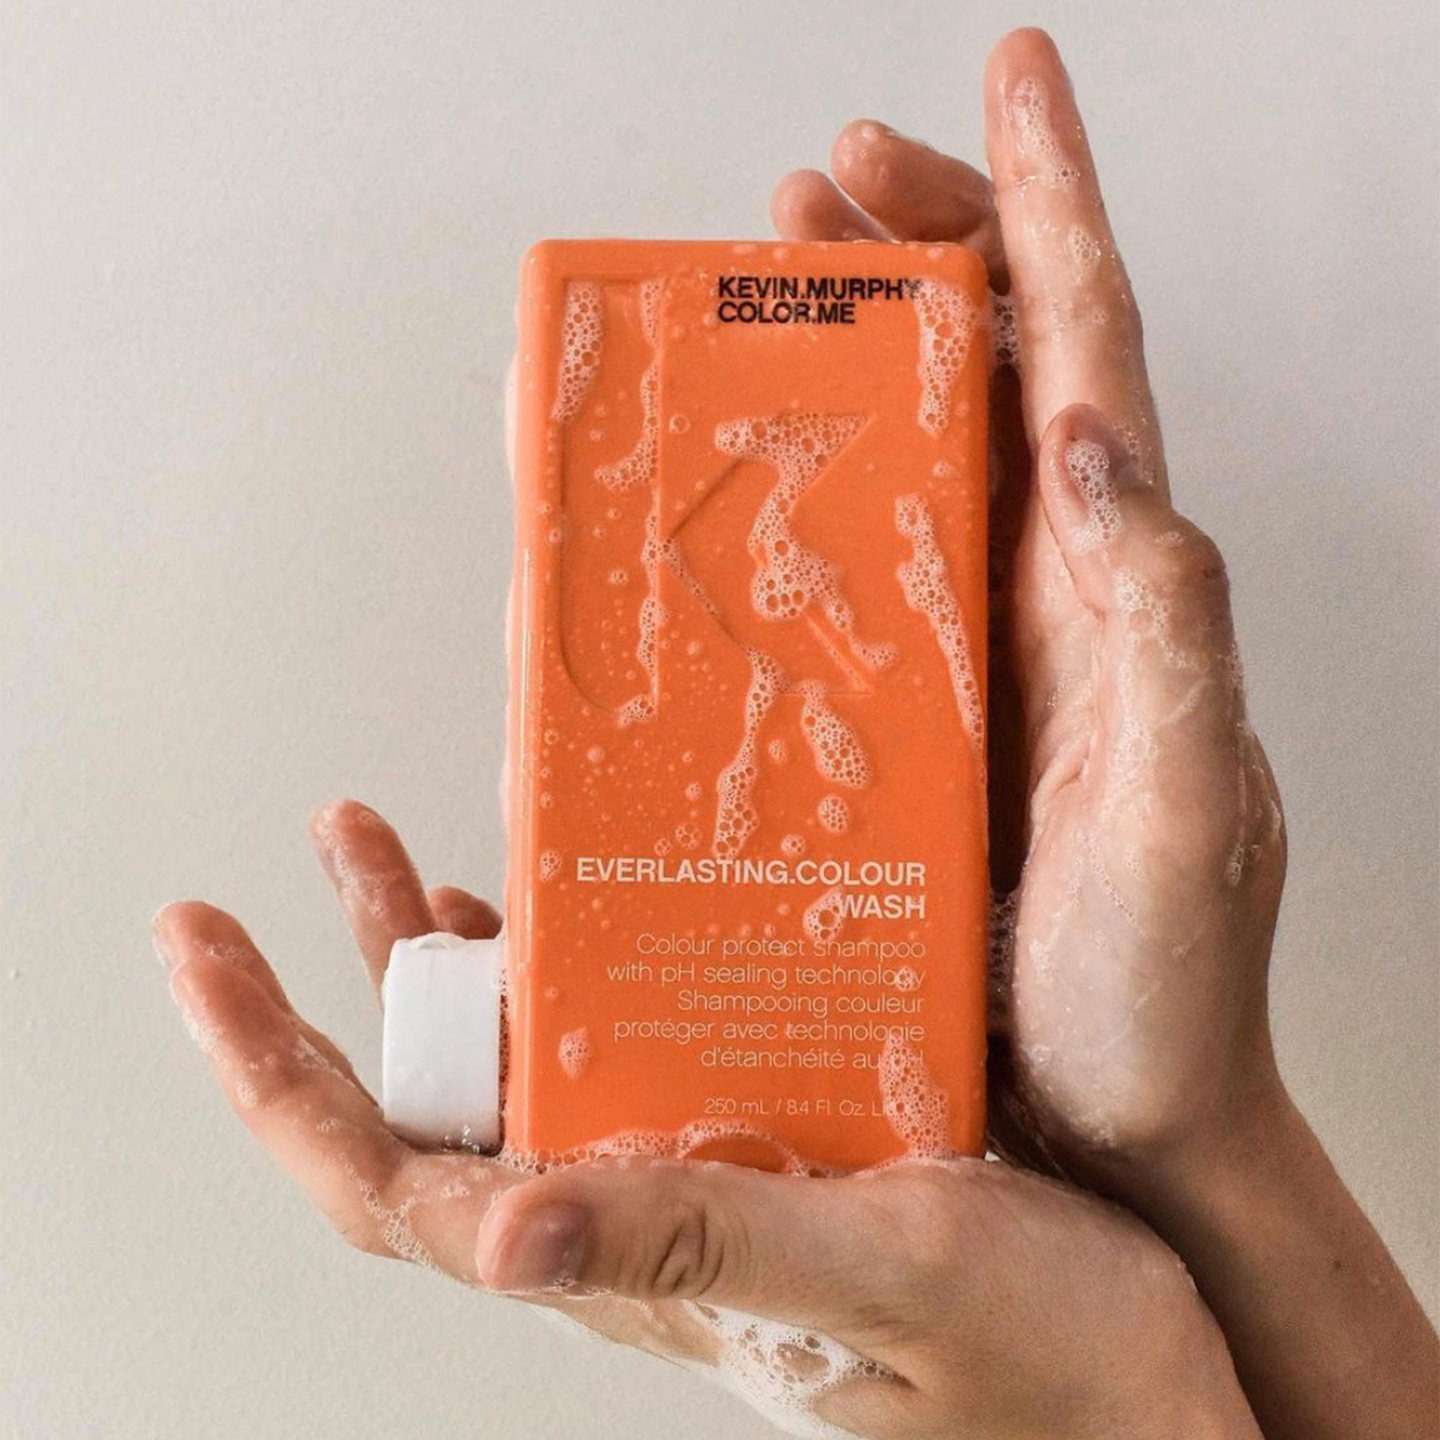 Hands holding a bottle of Kevin Murphy Everlasting Colour Wash shampoo against a neutral background, showcasing the product's details and foamy texture